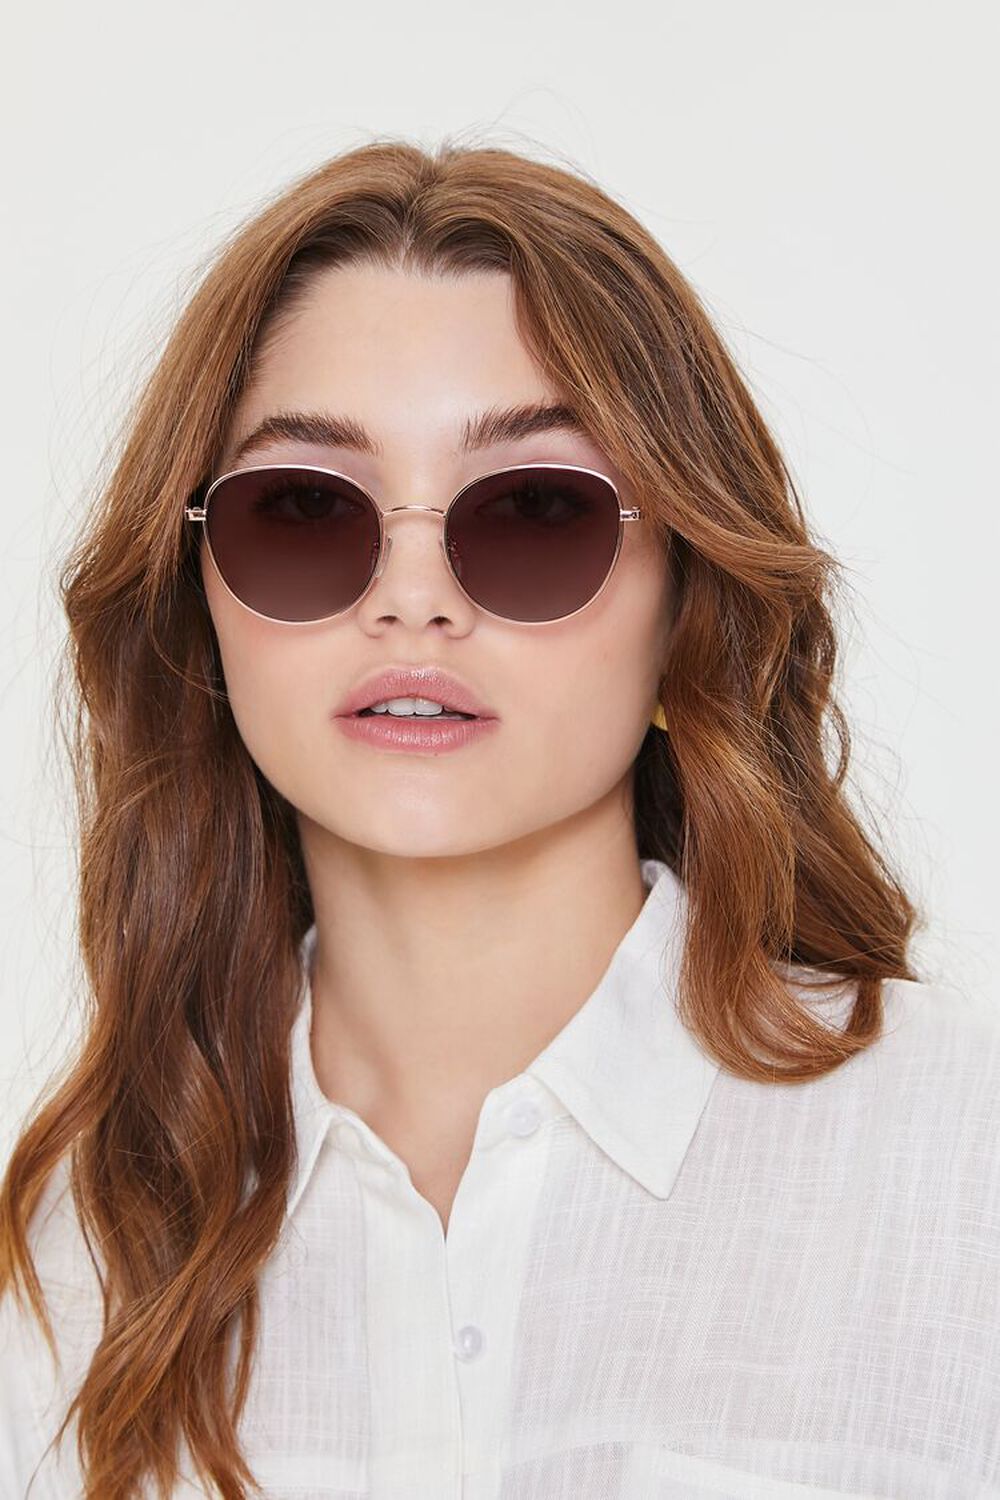 GOLD/BROWN Tinted Round Sunglasses, image 1